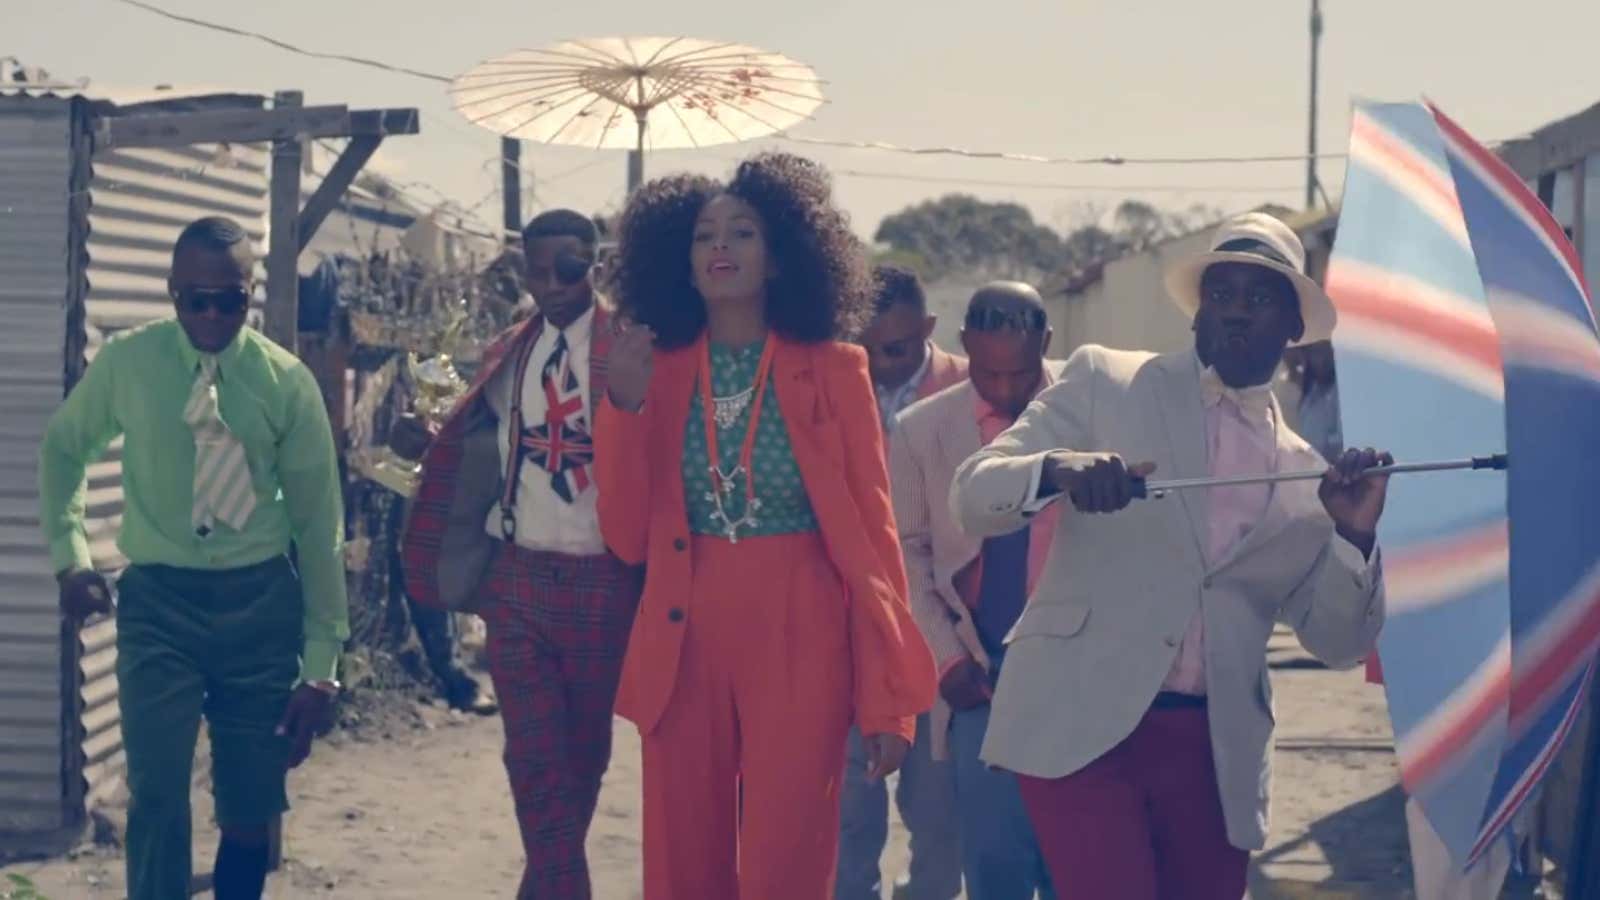 Does Solange’s latest video exploit South Africans?